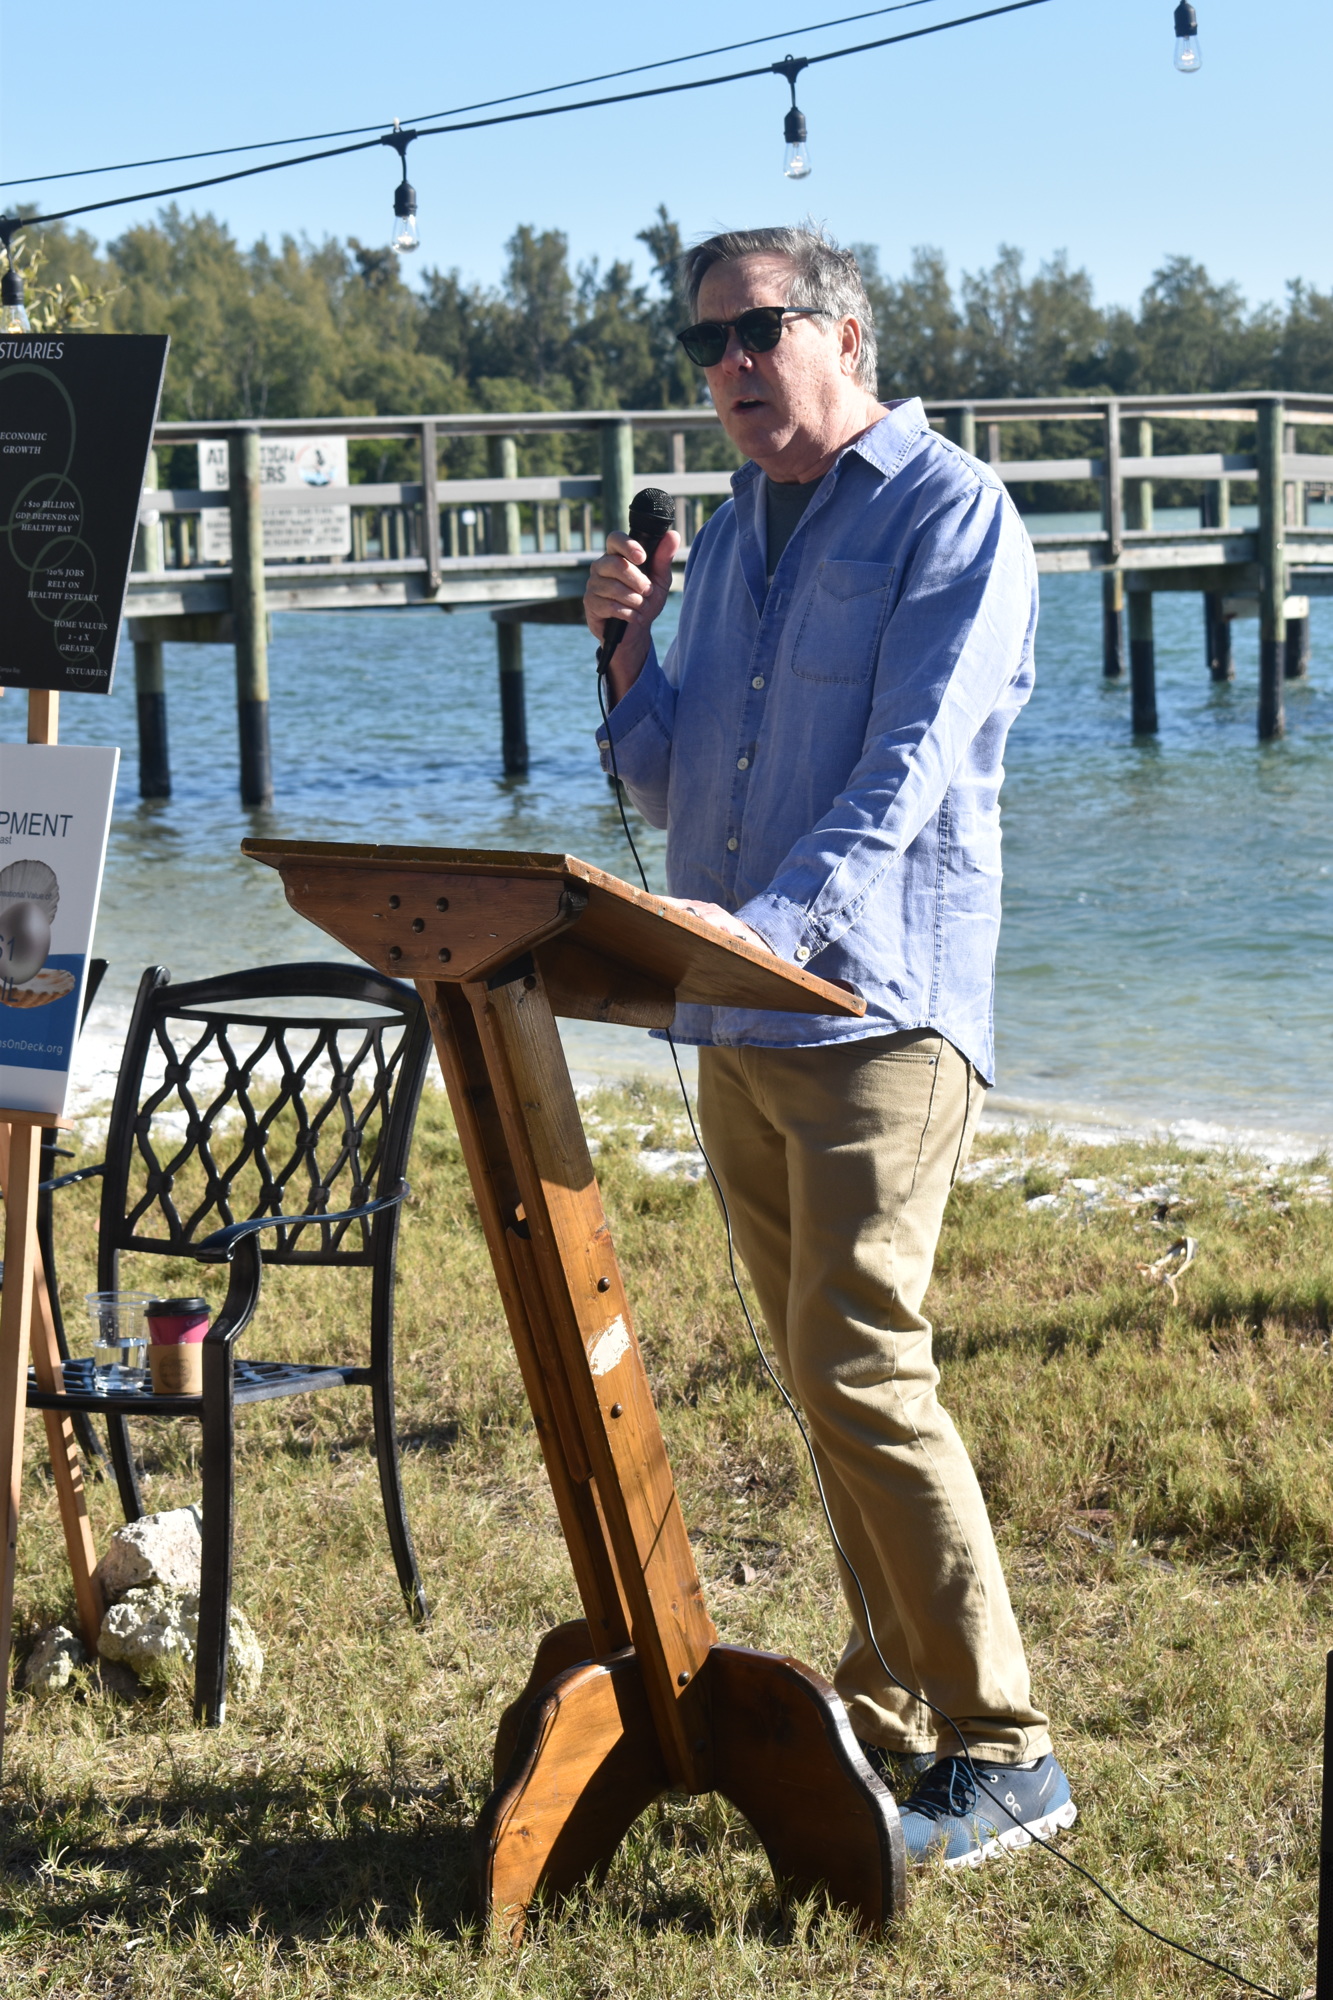 Chiles Group CEO and Gulf Shellfish Institute Board Member Ed Chiles spoke before a crowd Saturday morning to announce the launch of the All Clams on Deck initiative.